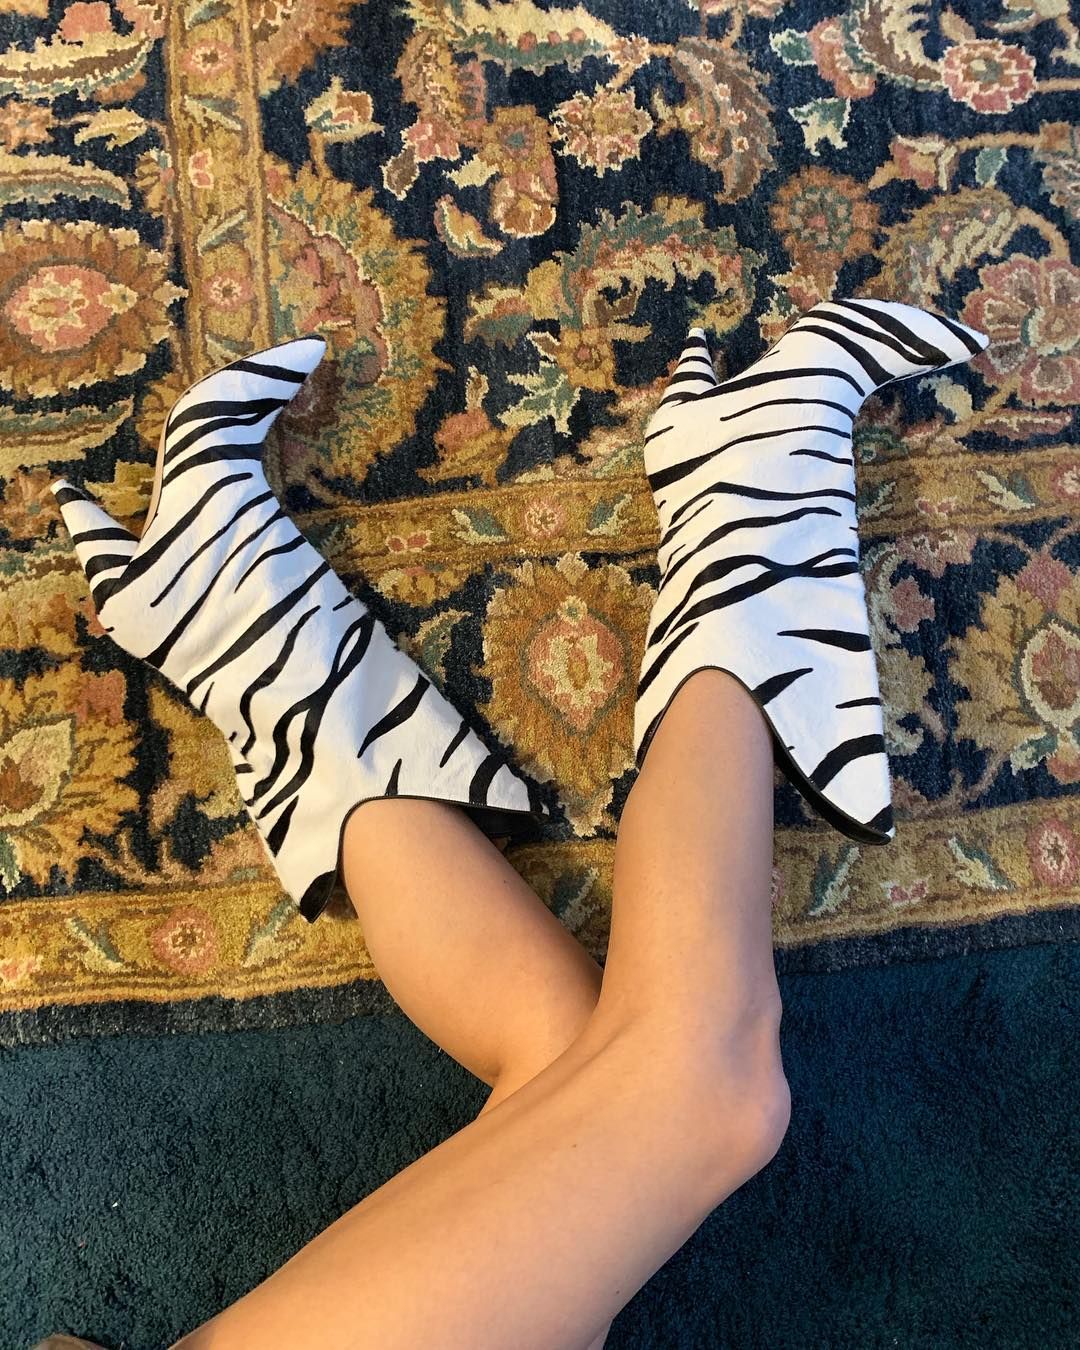 Wild Feet: The Trend of Animal Print
Shoes